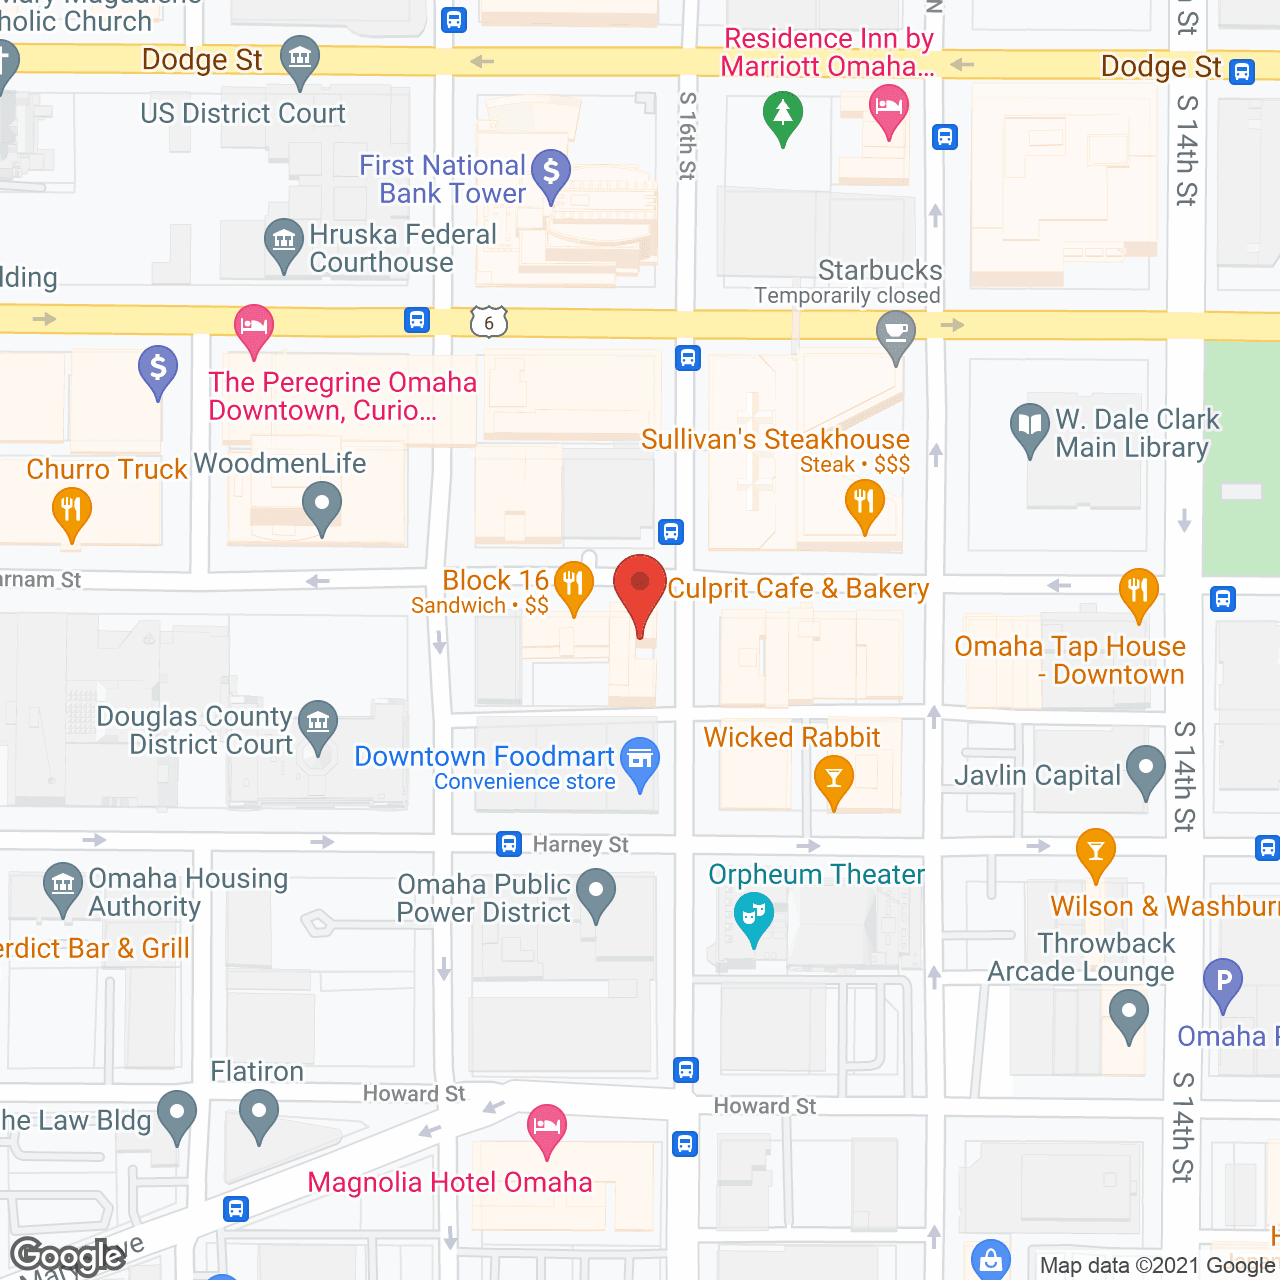 Primary Home Health Care in google map